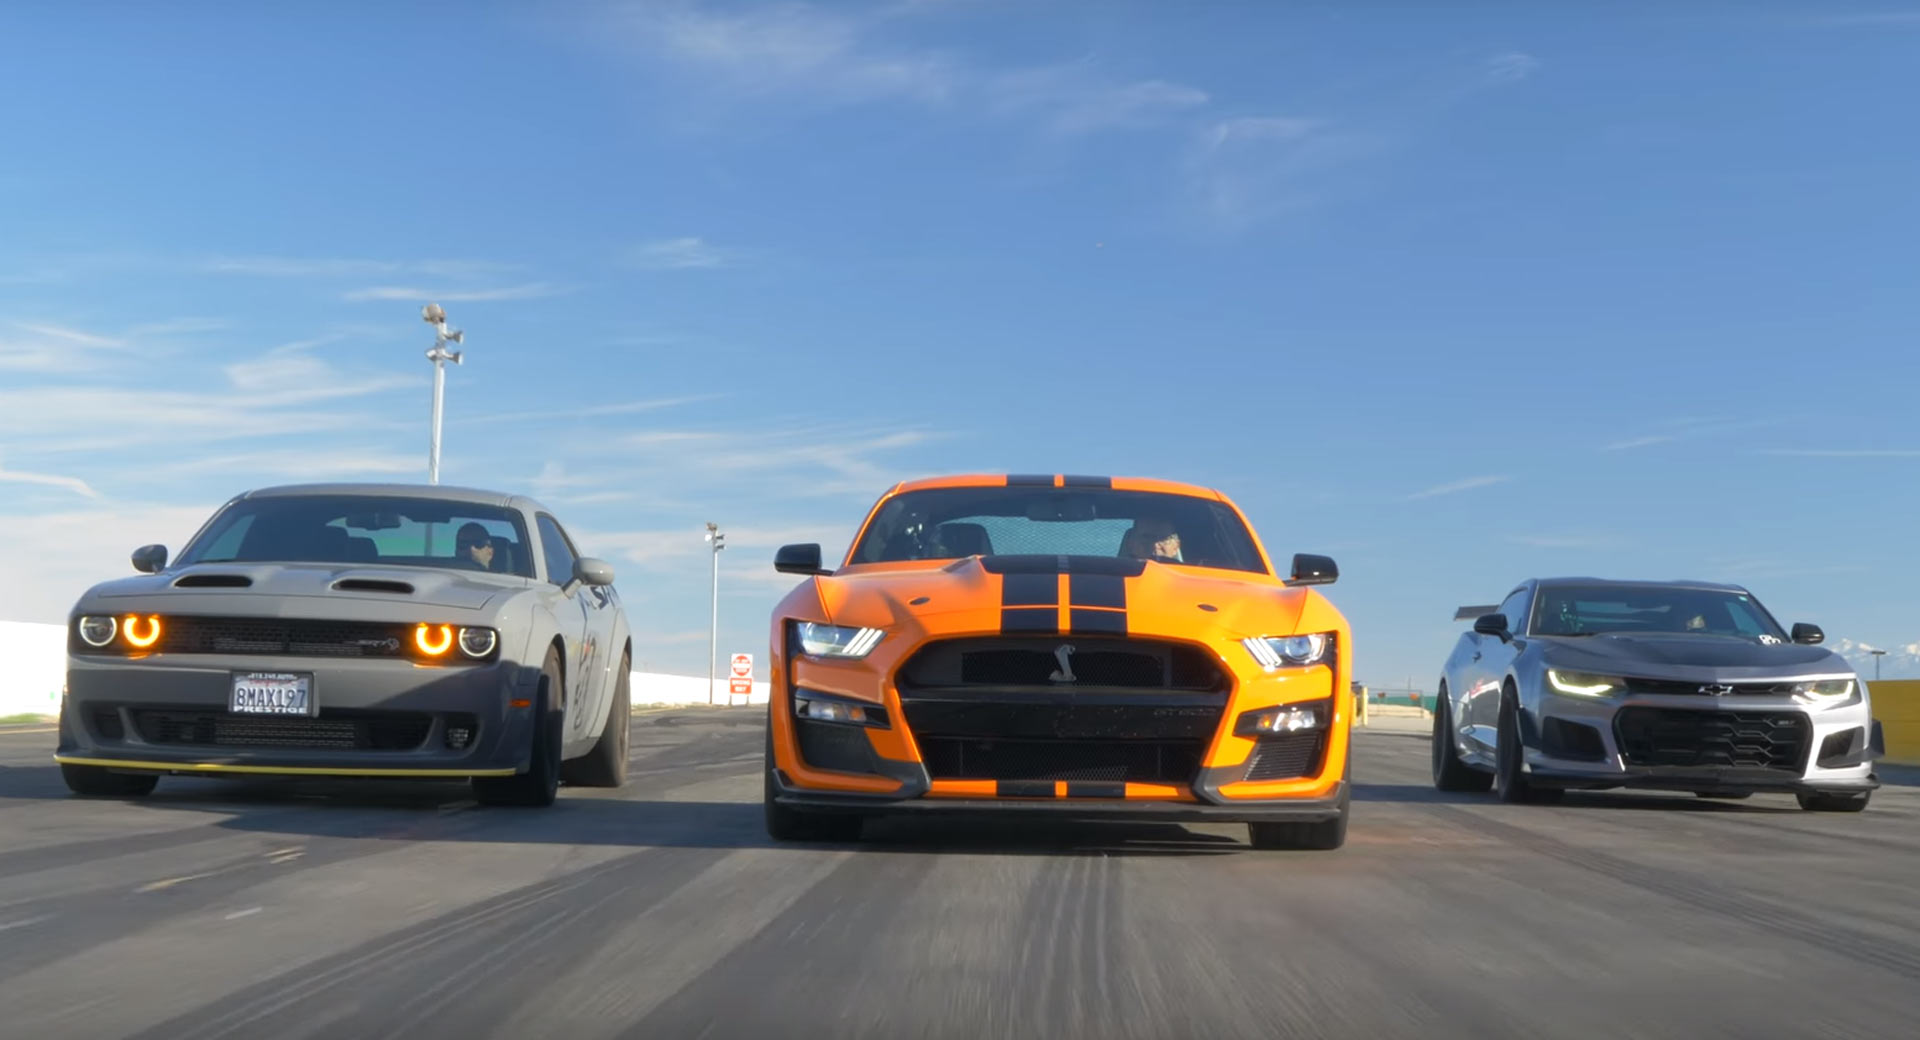 Ford Mustang Shelby GT500, Camaro ZL1 1LE, And Hellcat Redeye Are All  Monsters | Carscoops